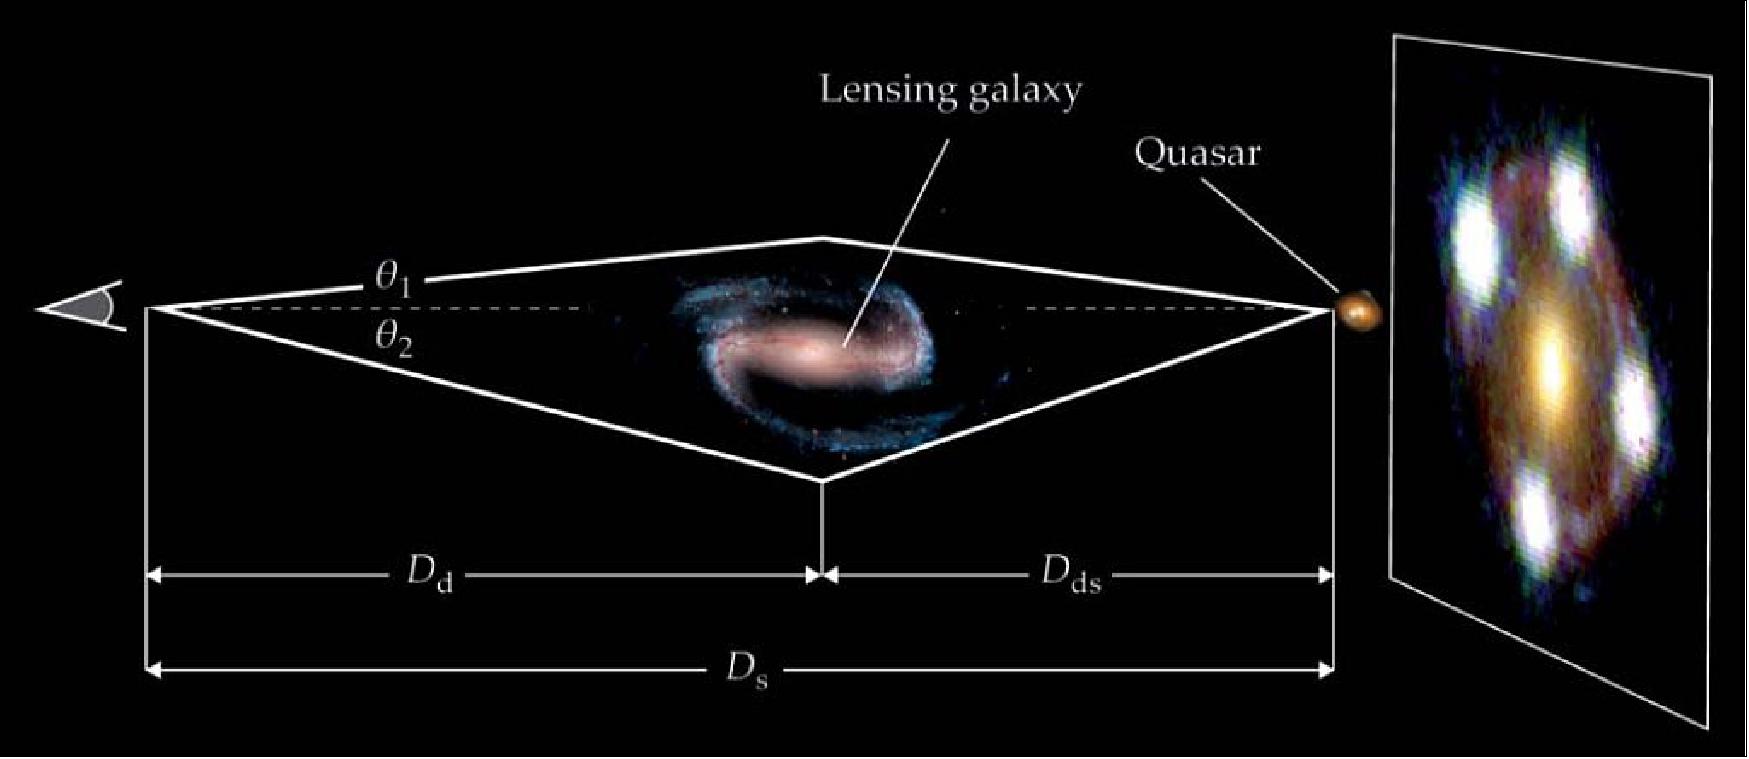 Figure 1: Strong Gravitational Lensing by a foreground galaxy can cause a quasar to appear as several distinct images. Observing the relative time delays among those images provides information about the combination of distances between Earth, the lensing galaxy, and the quasar. Given that the angles θ1and θ2are small, the difference in path lengths shown here is proportional to DdDs/Dds; the difference in light travel time, which includes the effects of general relativity and the universe's expansion, is proportional to that same value (image credit: Freddie Pagani)